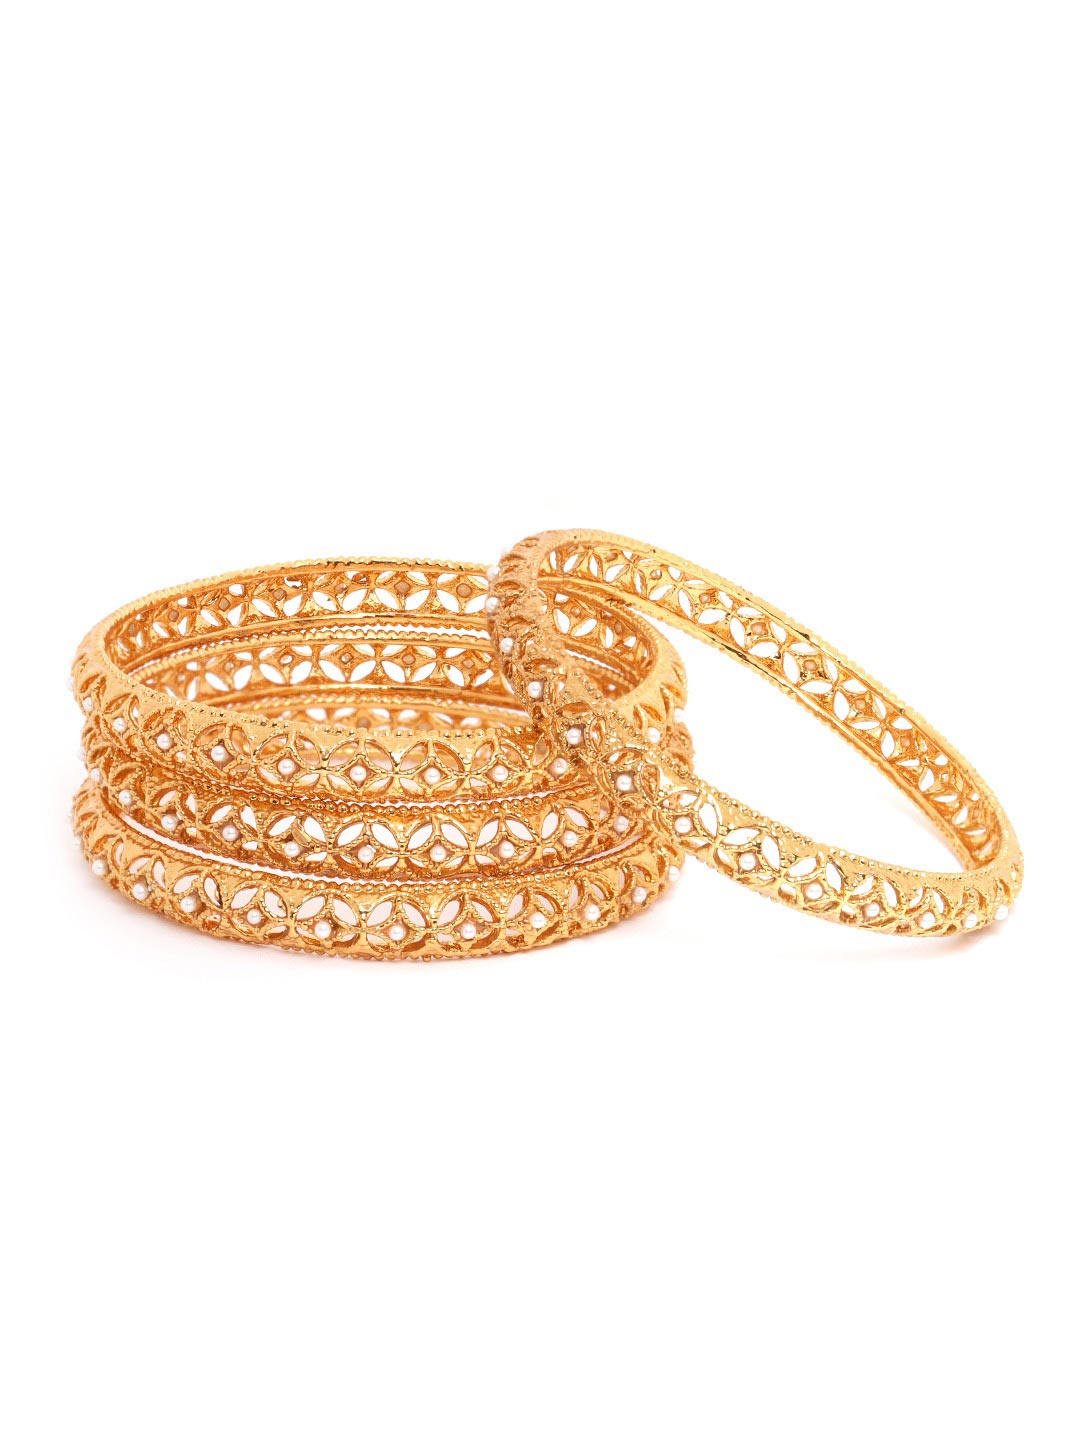 Set of 4 Gold Plated Bangles